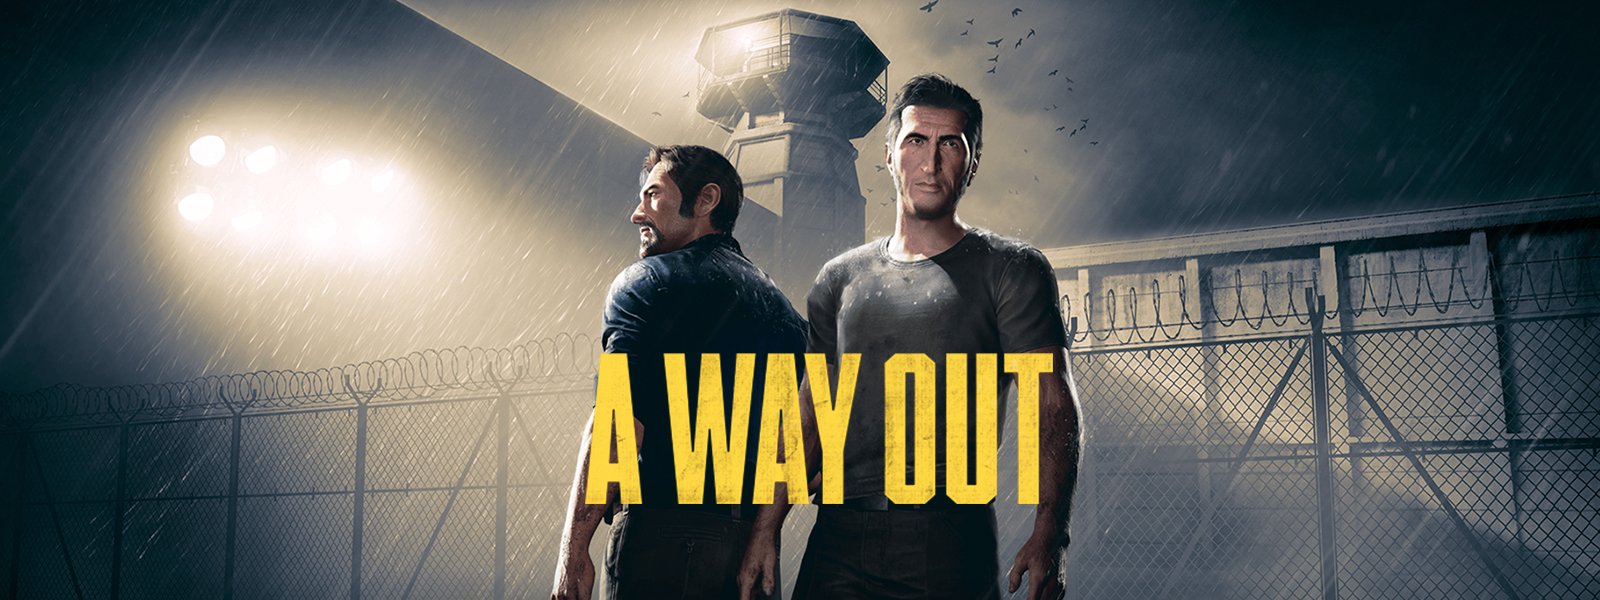 A way out джойстик. Way out игра. A way out Лео. A way out персонажи. A way out 3.